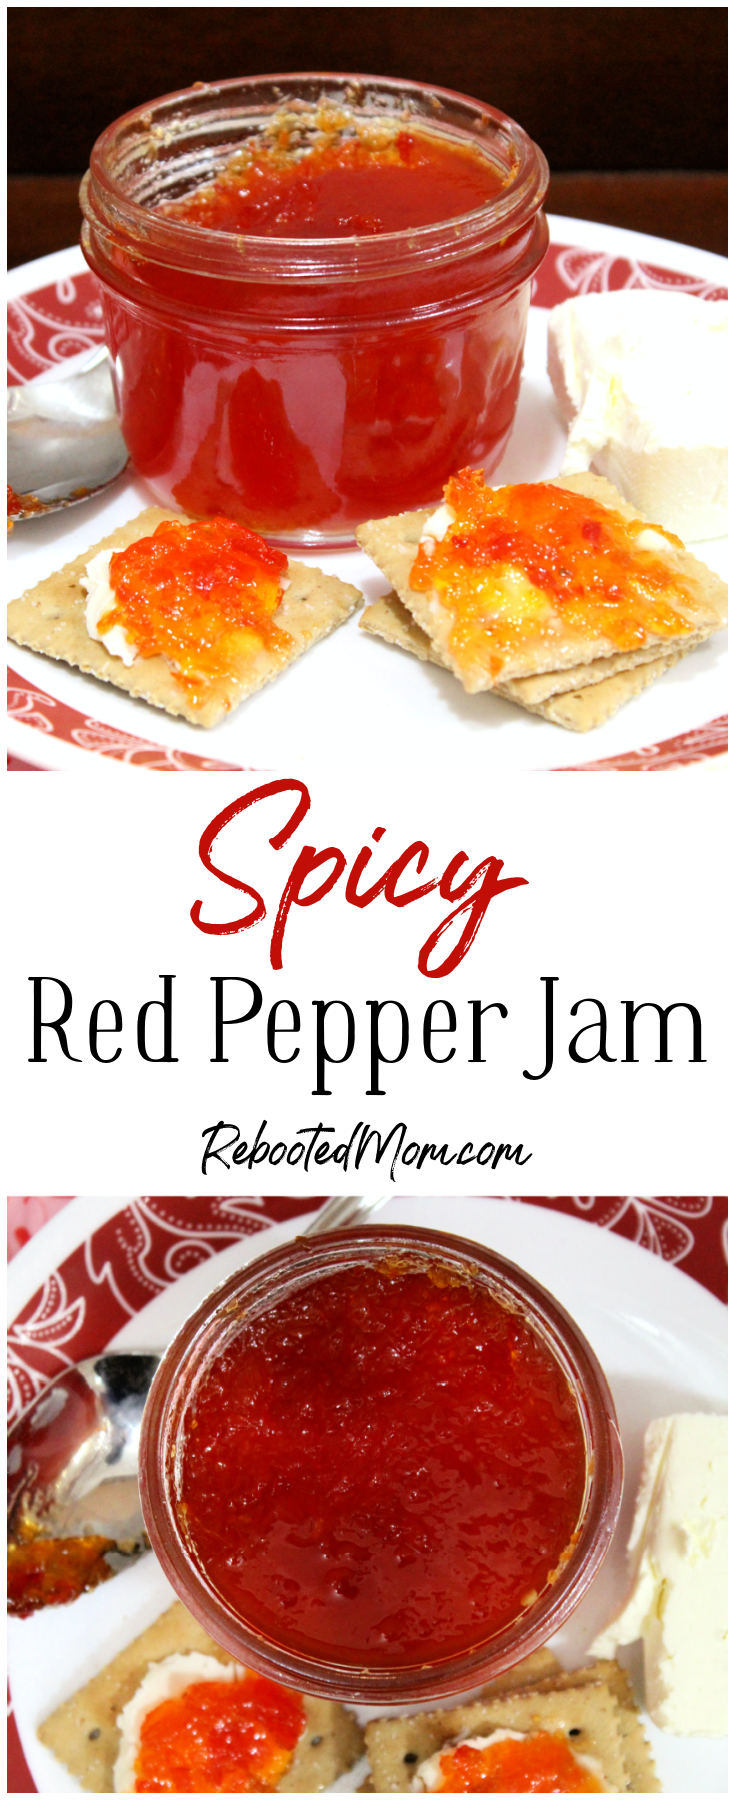 Spicy Red Pepper Jam combines fiery fresno peppers with red bell peppers in a jam that's sweet yet has some heat on the back end! Perfect with cream cheese! #Fresno #pepper #jam #jelly #canning #spicy